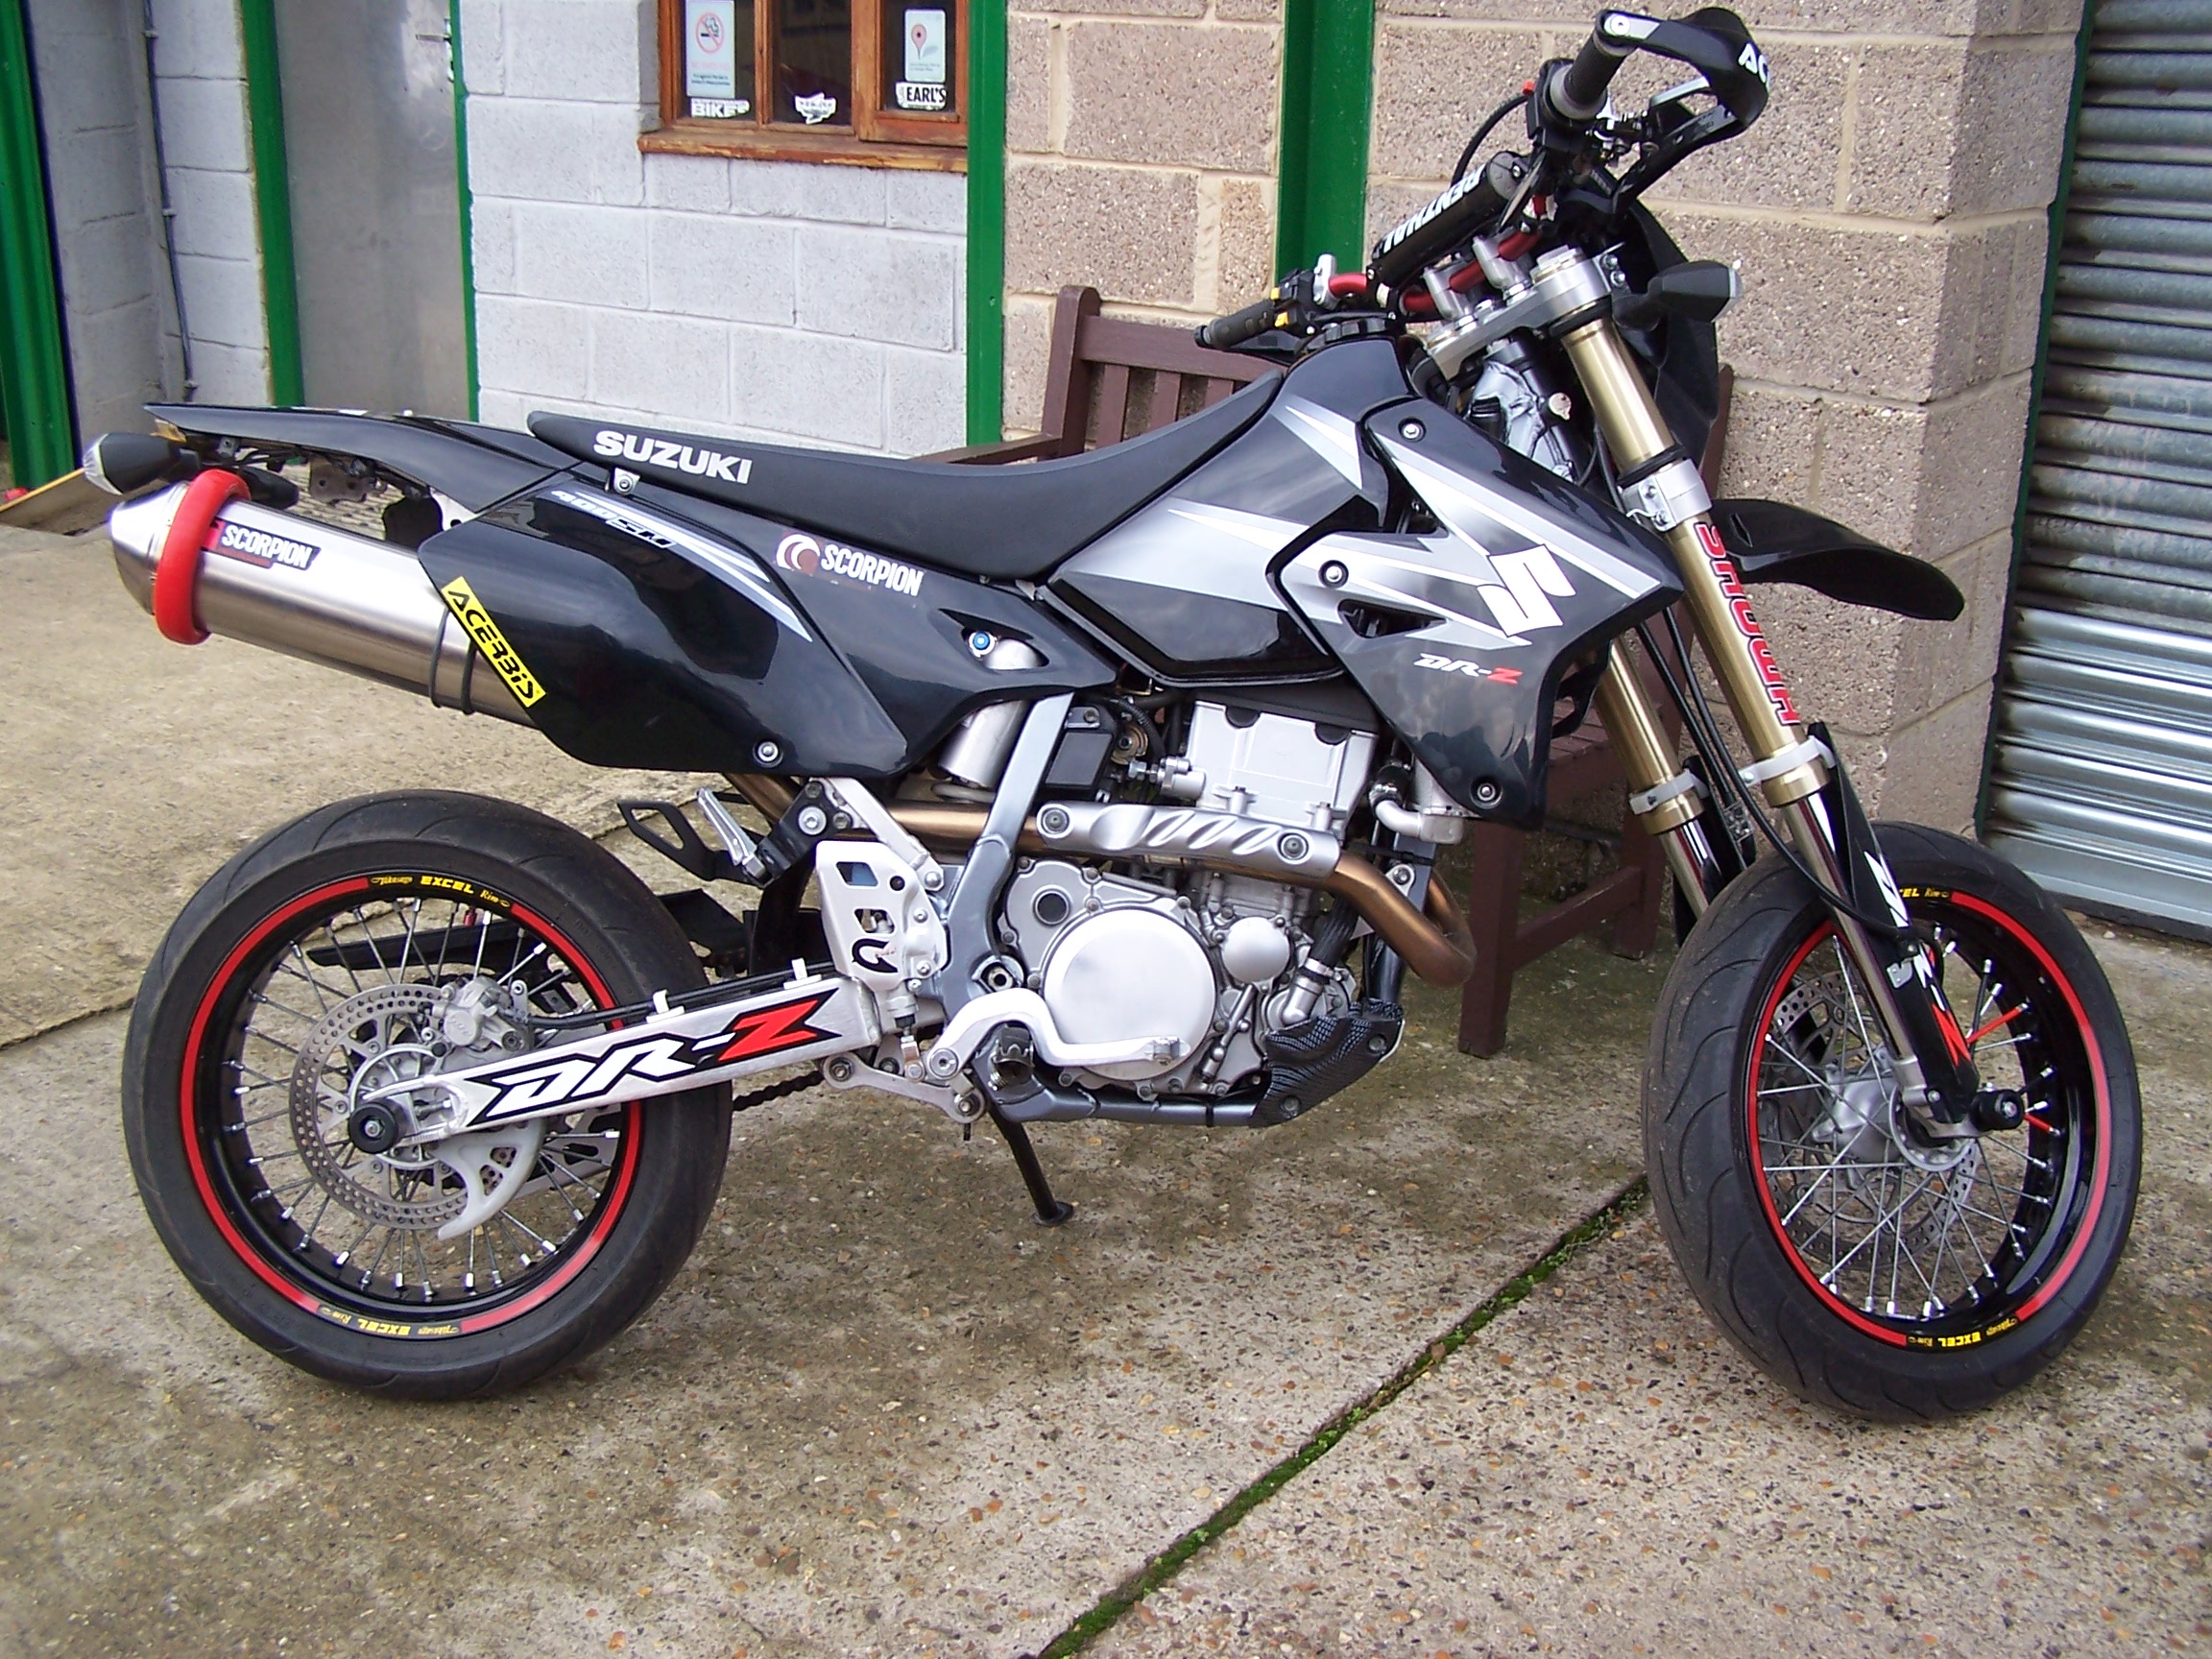 Suzuki DRZ450SM with full Scorpion system jetted and de-restricted for owner’s new licence